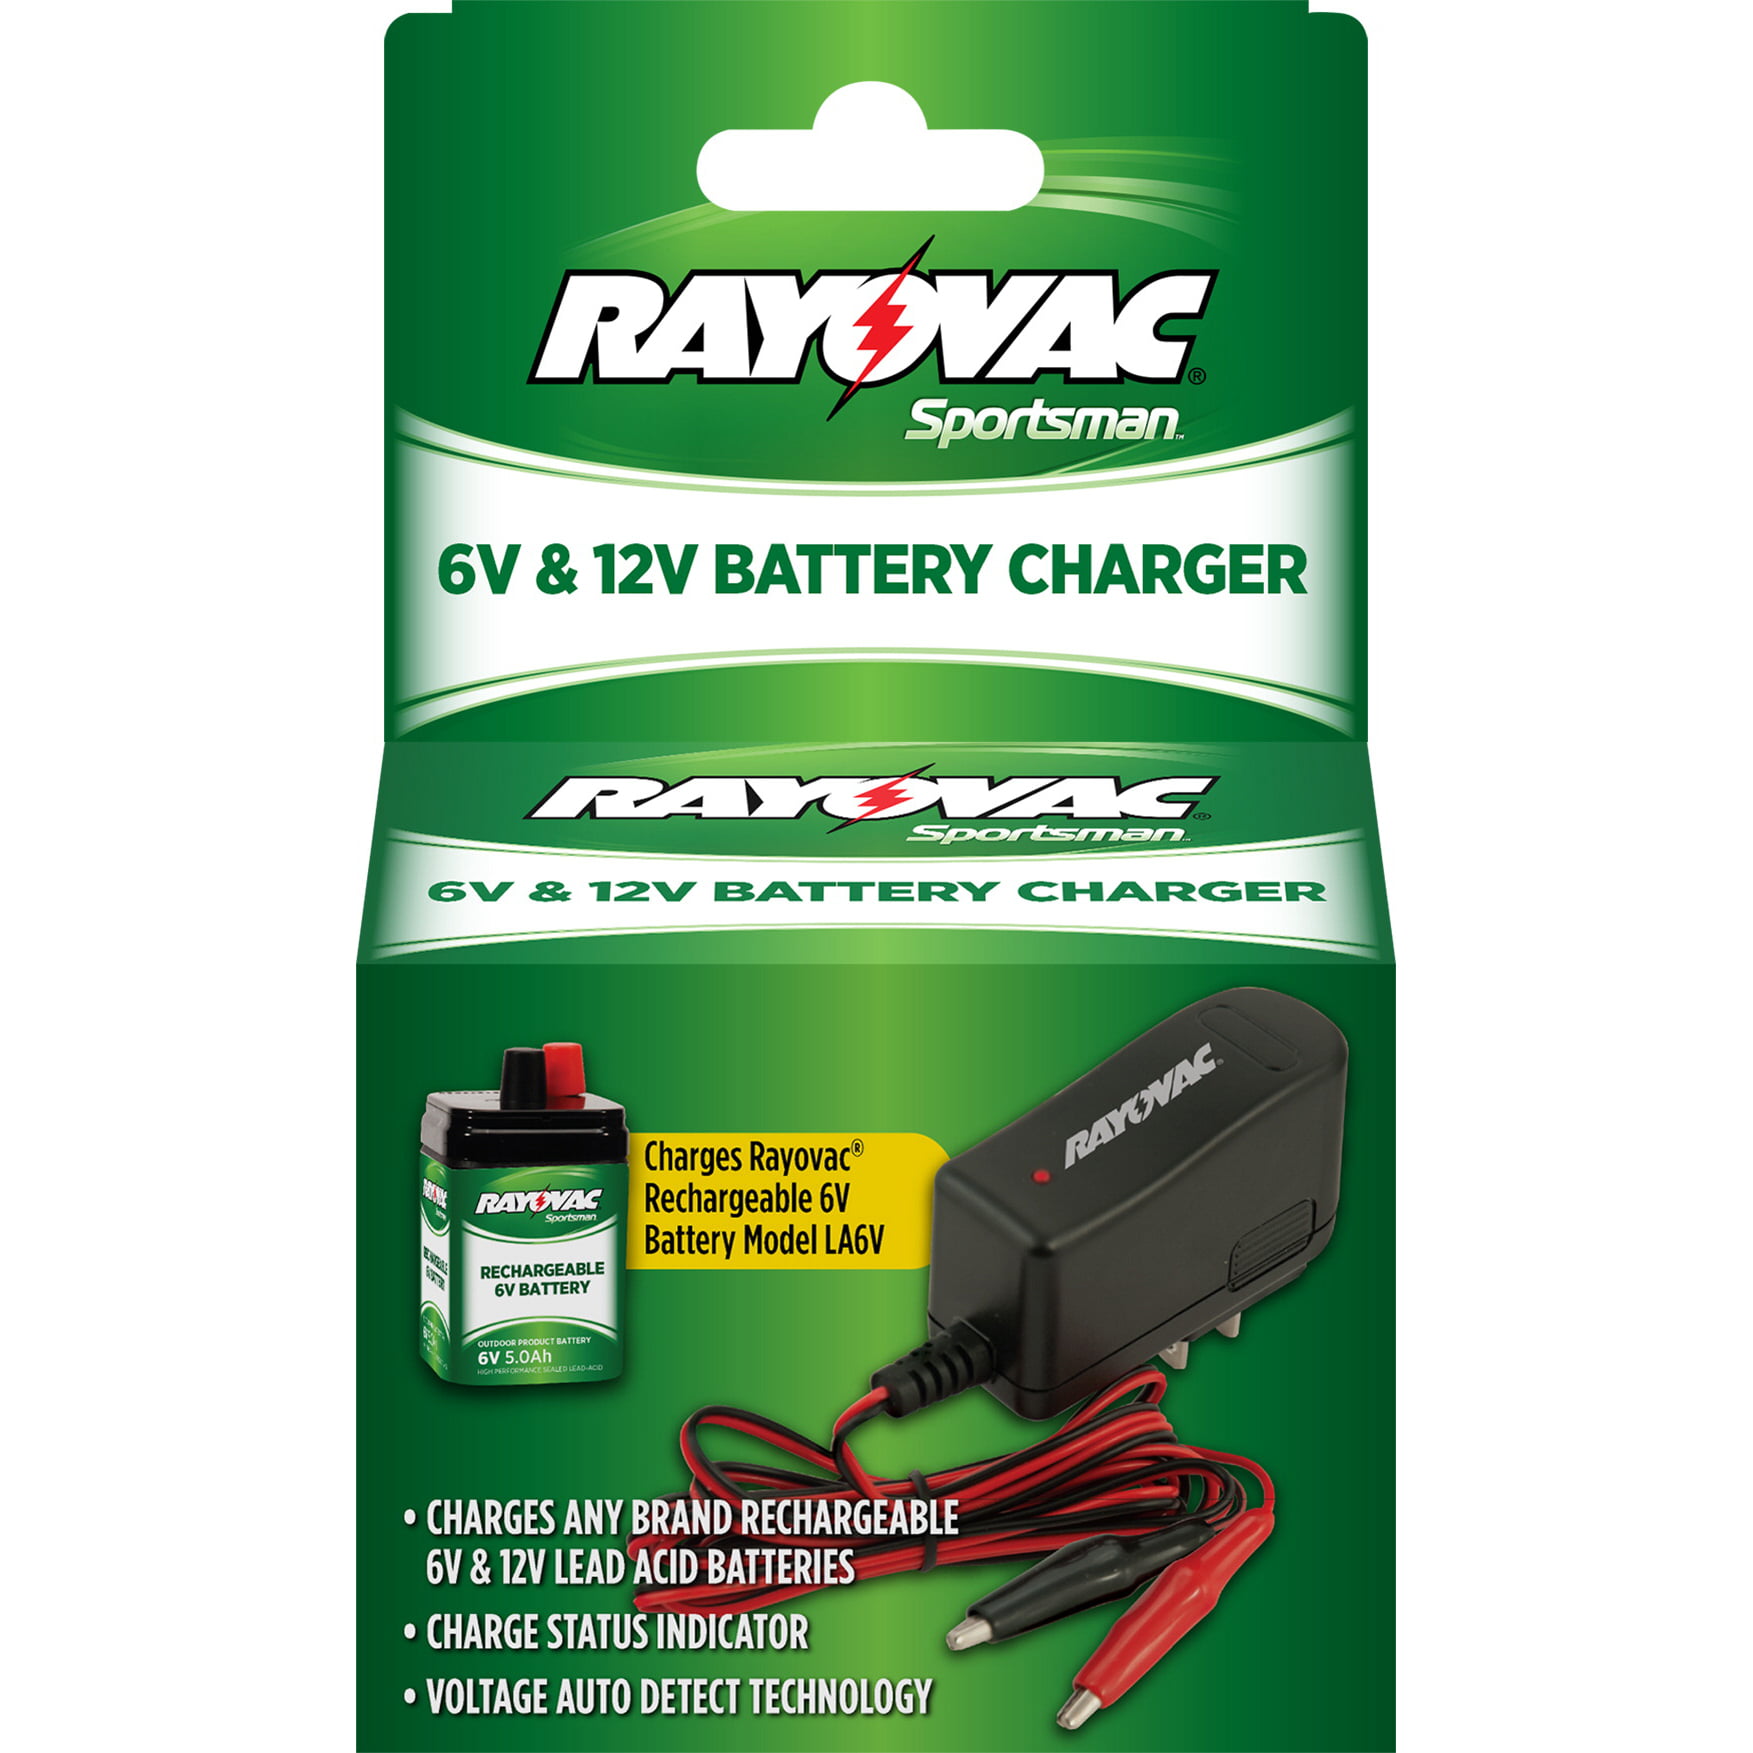 SIX RAYOVAC 6V RECHARGEABLE BATTERIES for GAME FEEDER CAMERA HUNTING DEER TURKEY 